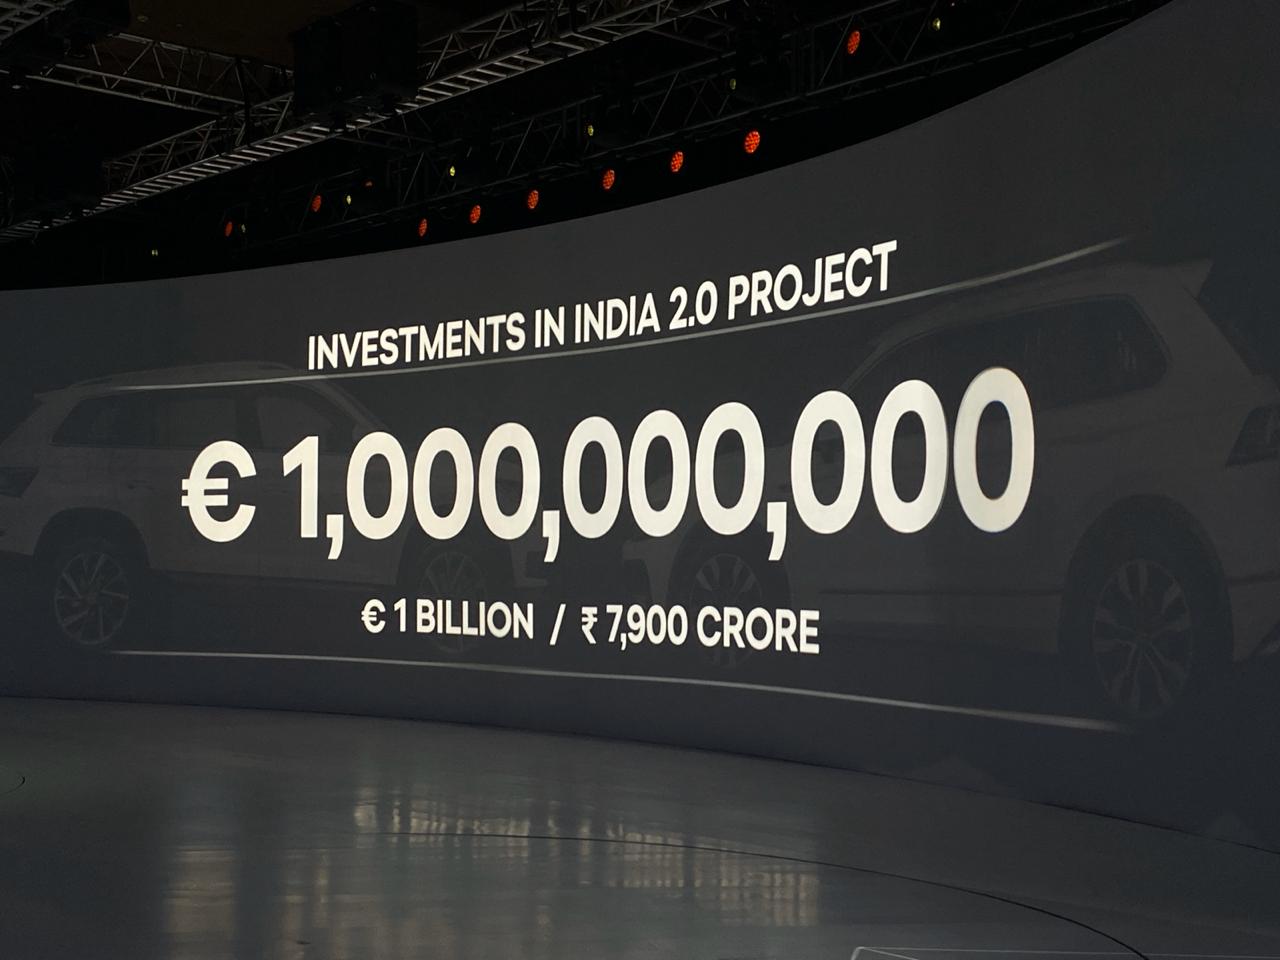 <p>The Group will invest ₹7,900 crore in the India 2.0 project.<br />
&nbsp;</p>